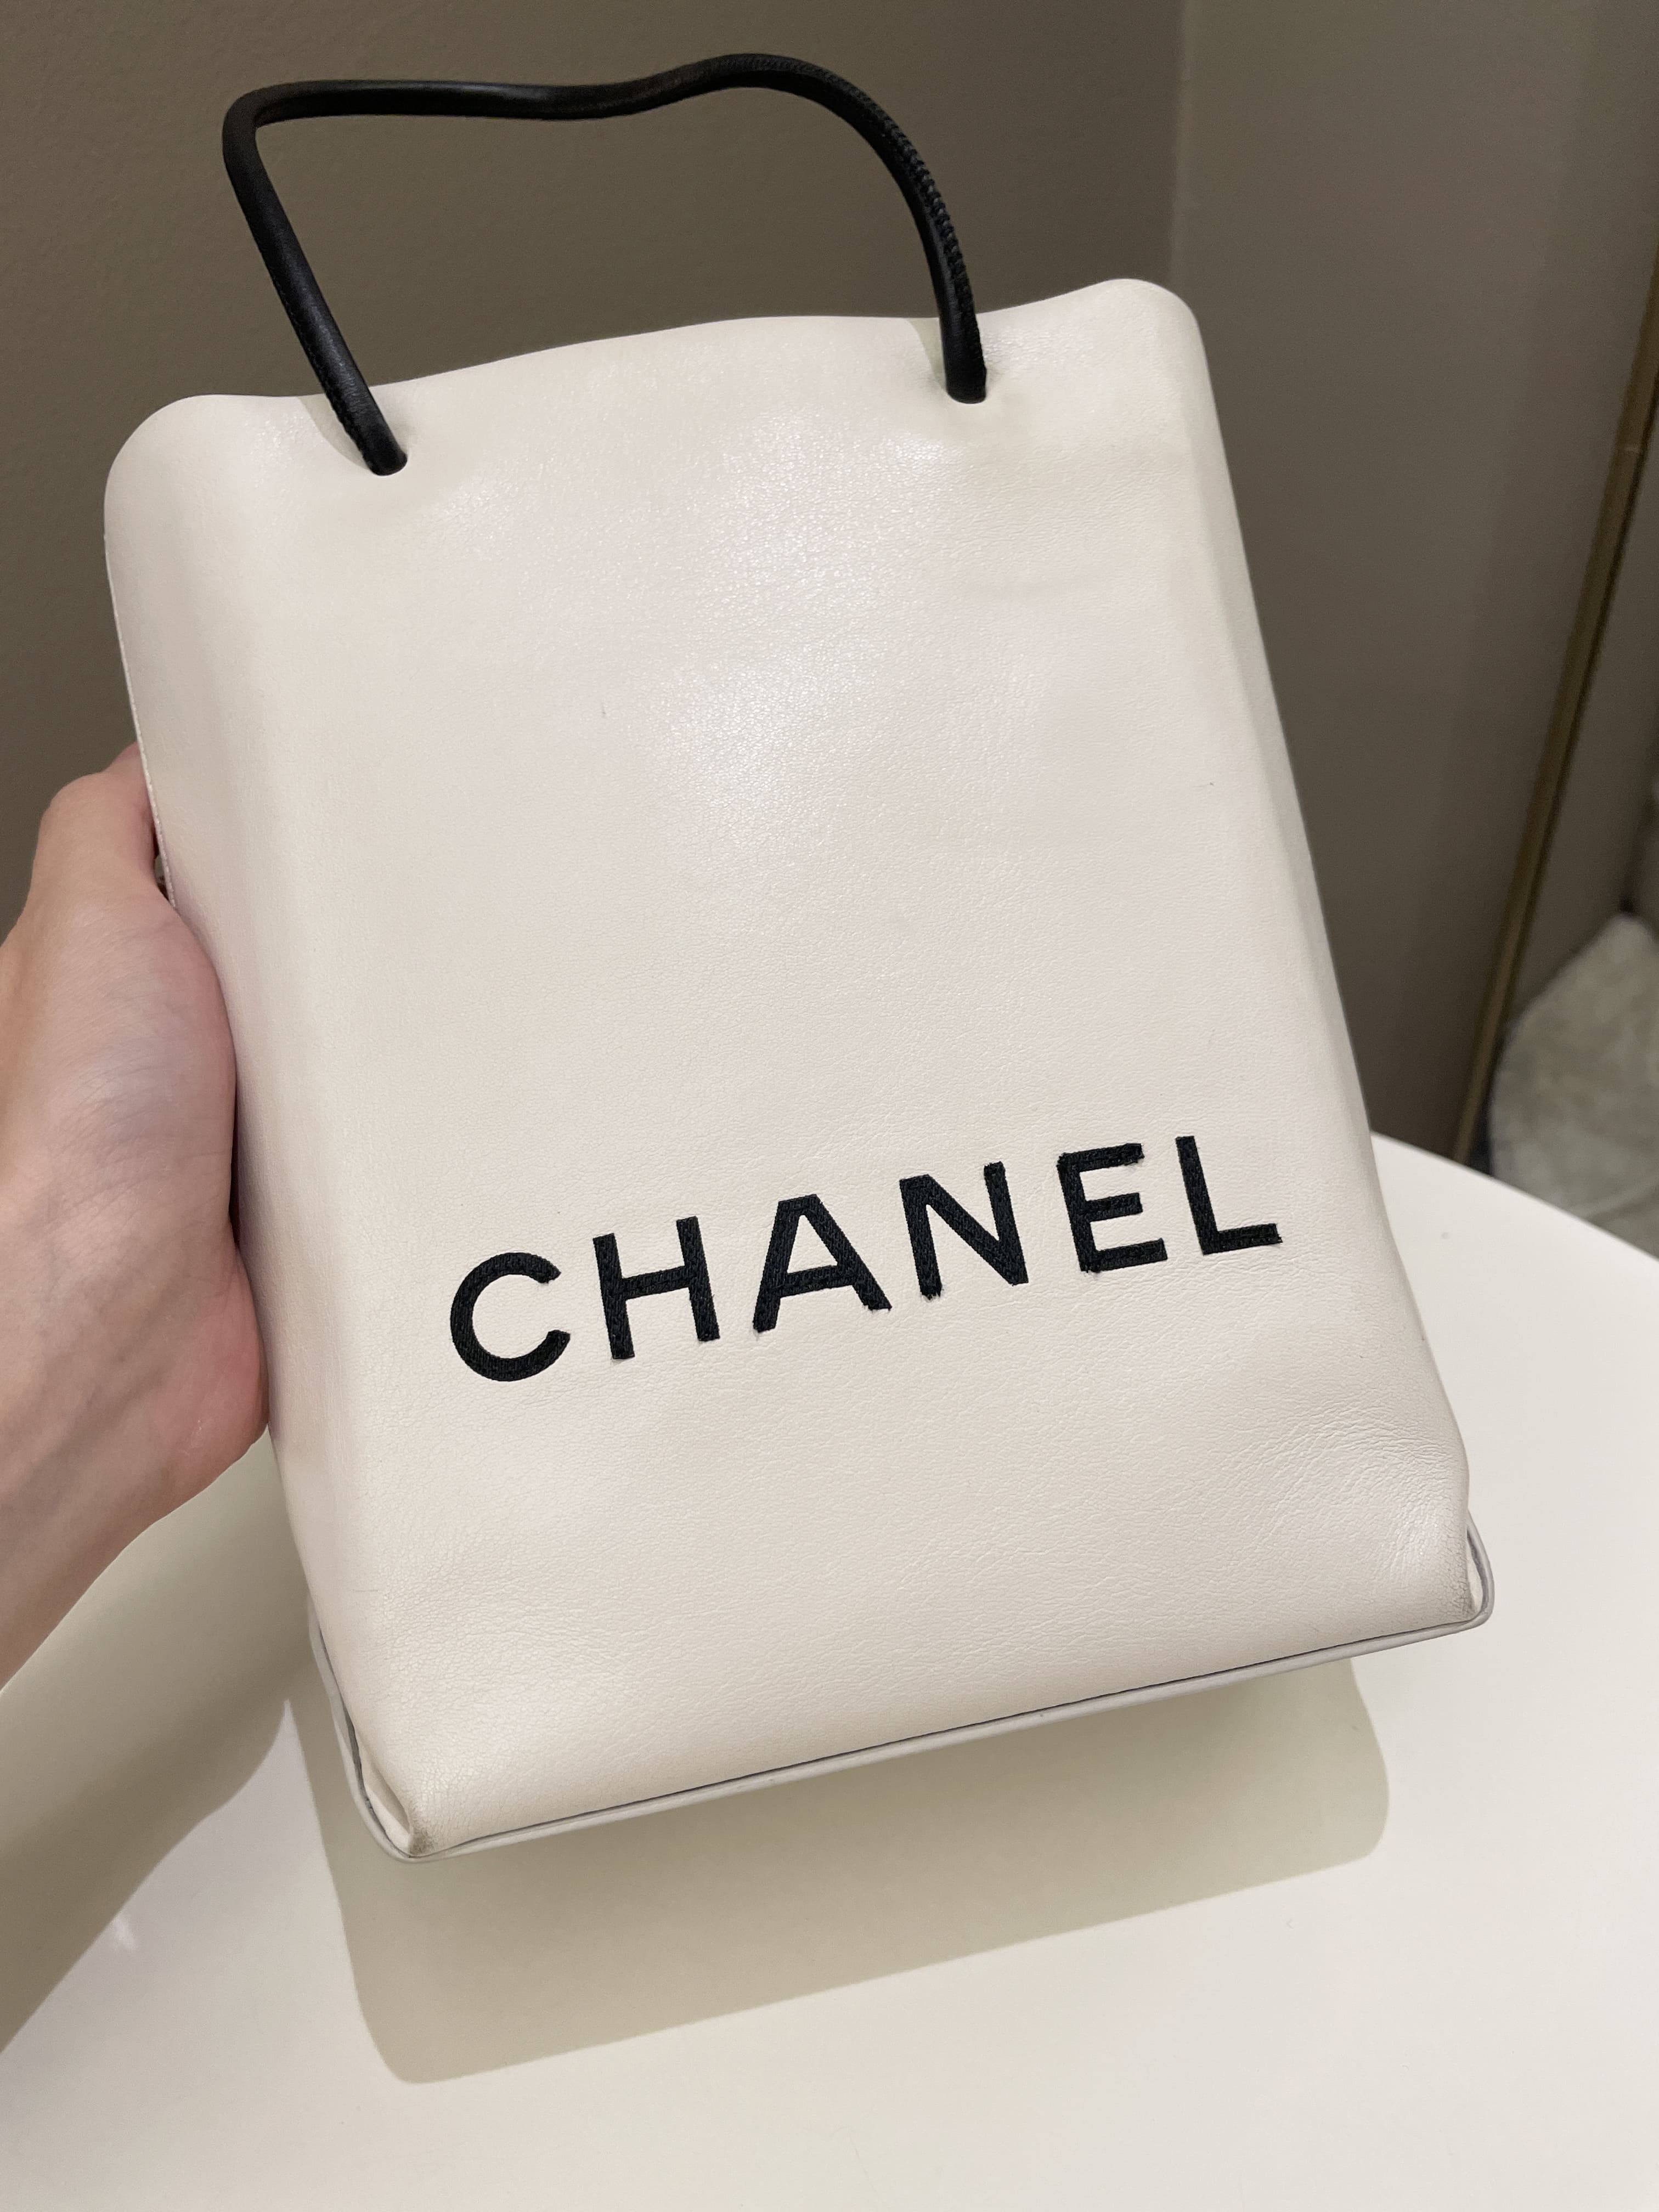 Chanel paper bag  Paper bag, Bags, Chanel black and white